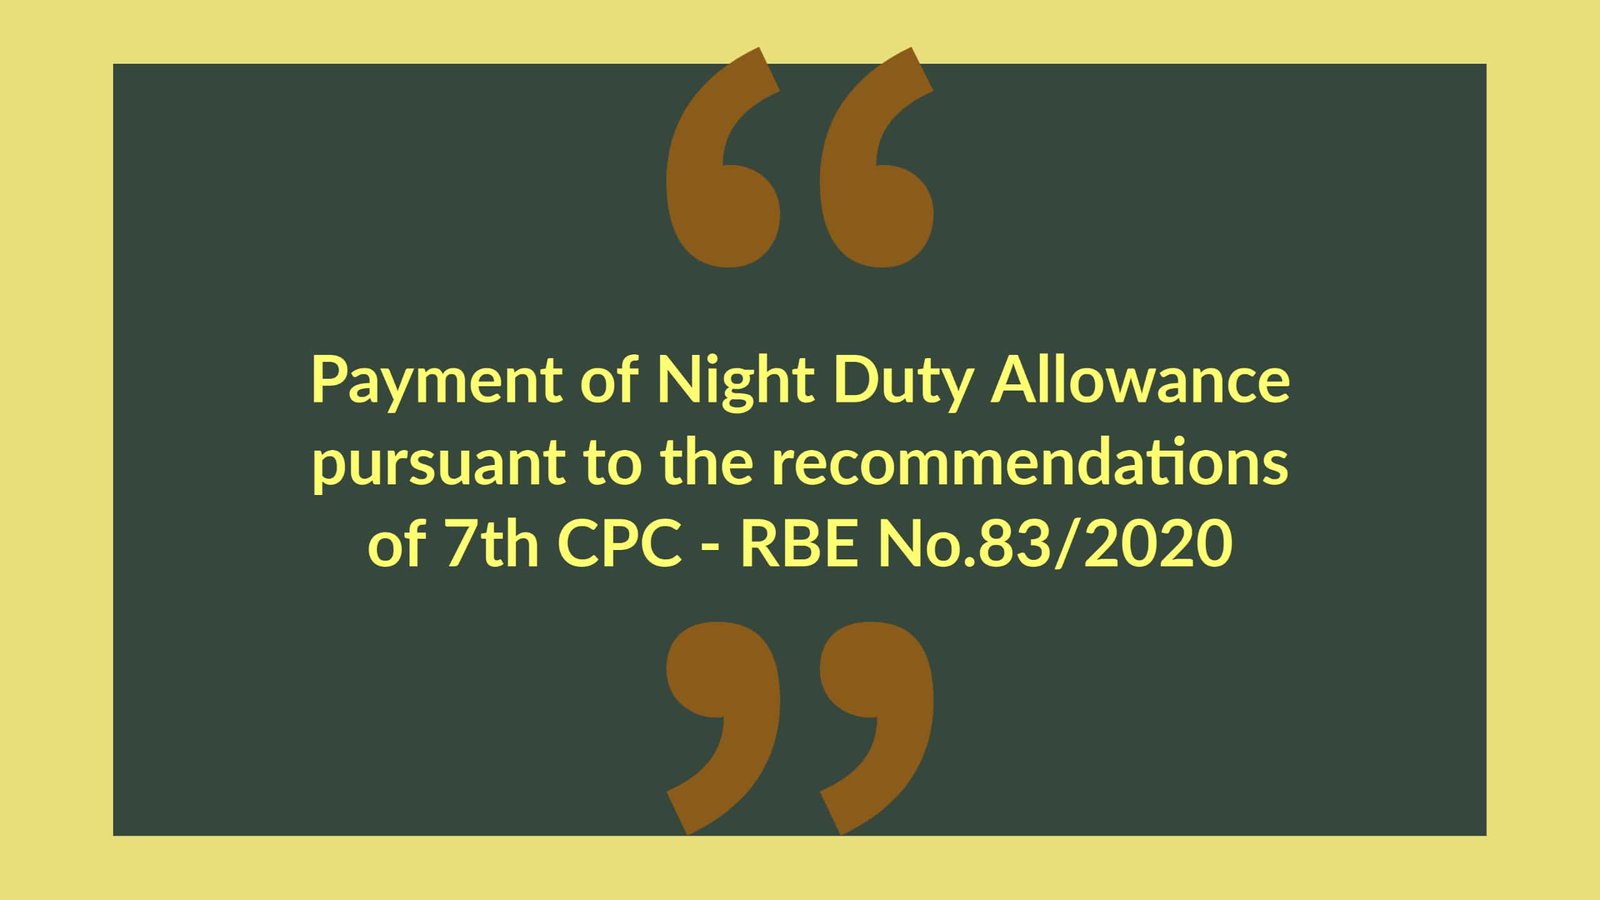 Payment of Night Duty Allowance pursuant to the recommendations of 7th CPC - RBE No.83/2020